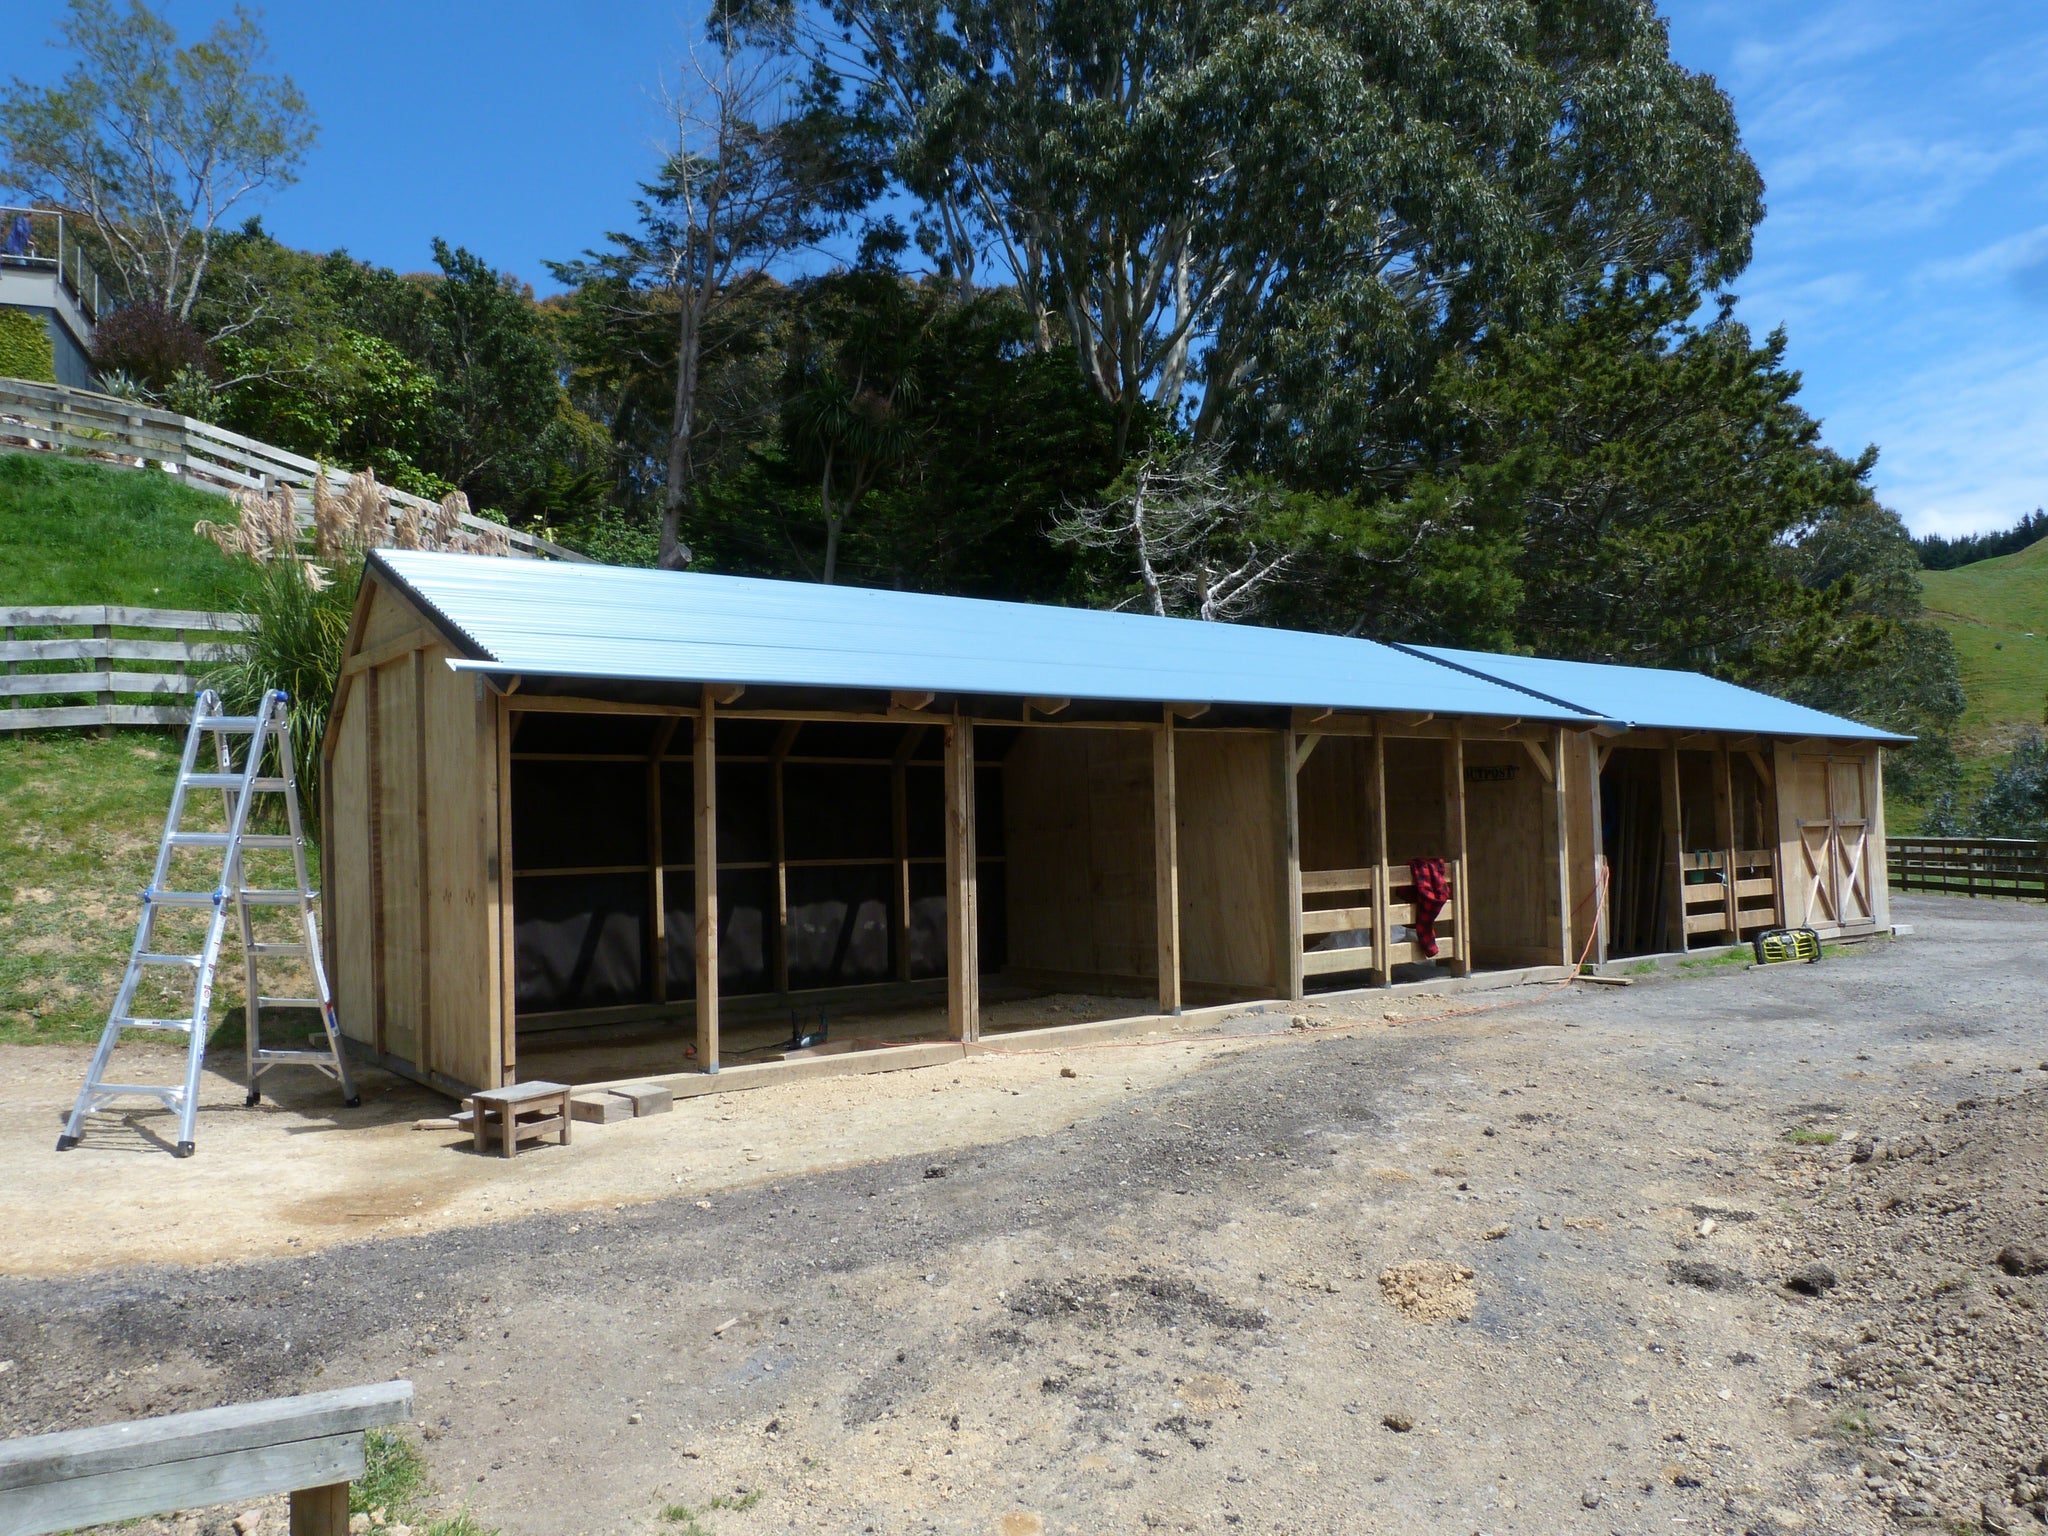 Carol Houston's Horse stable and double tackshed